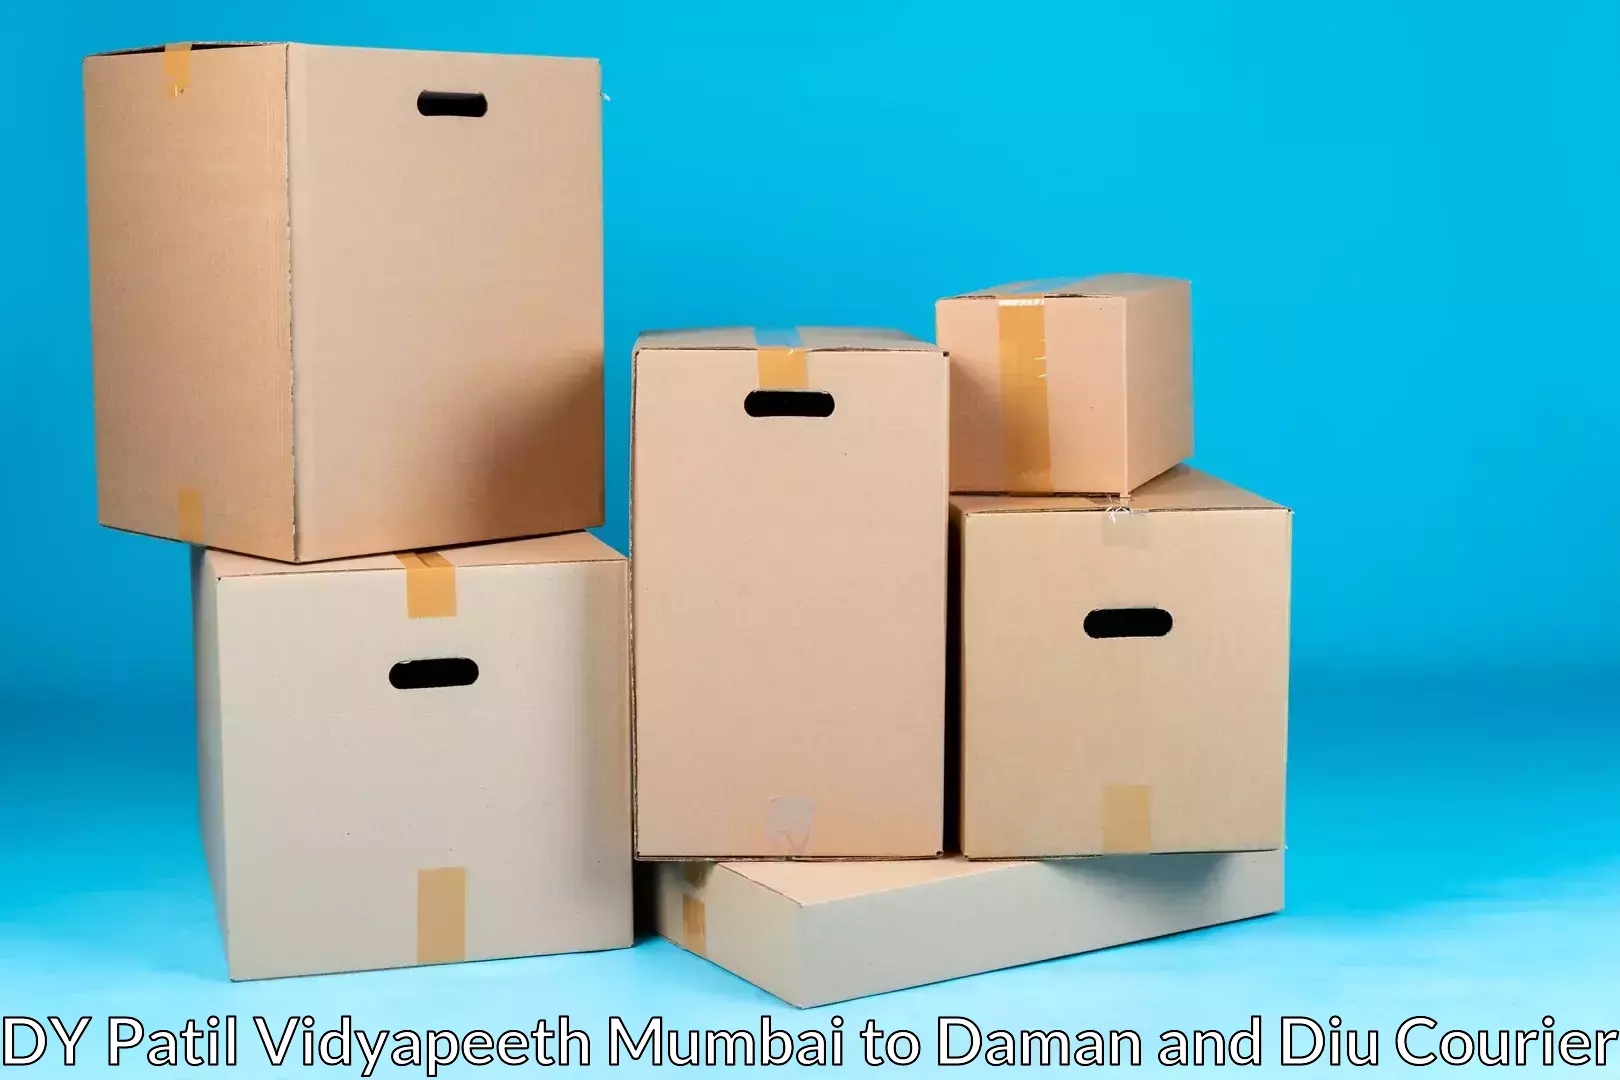 Specialized moving company in DY Patil Vidyapeeth Mumbai to Diu